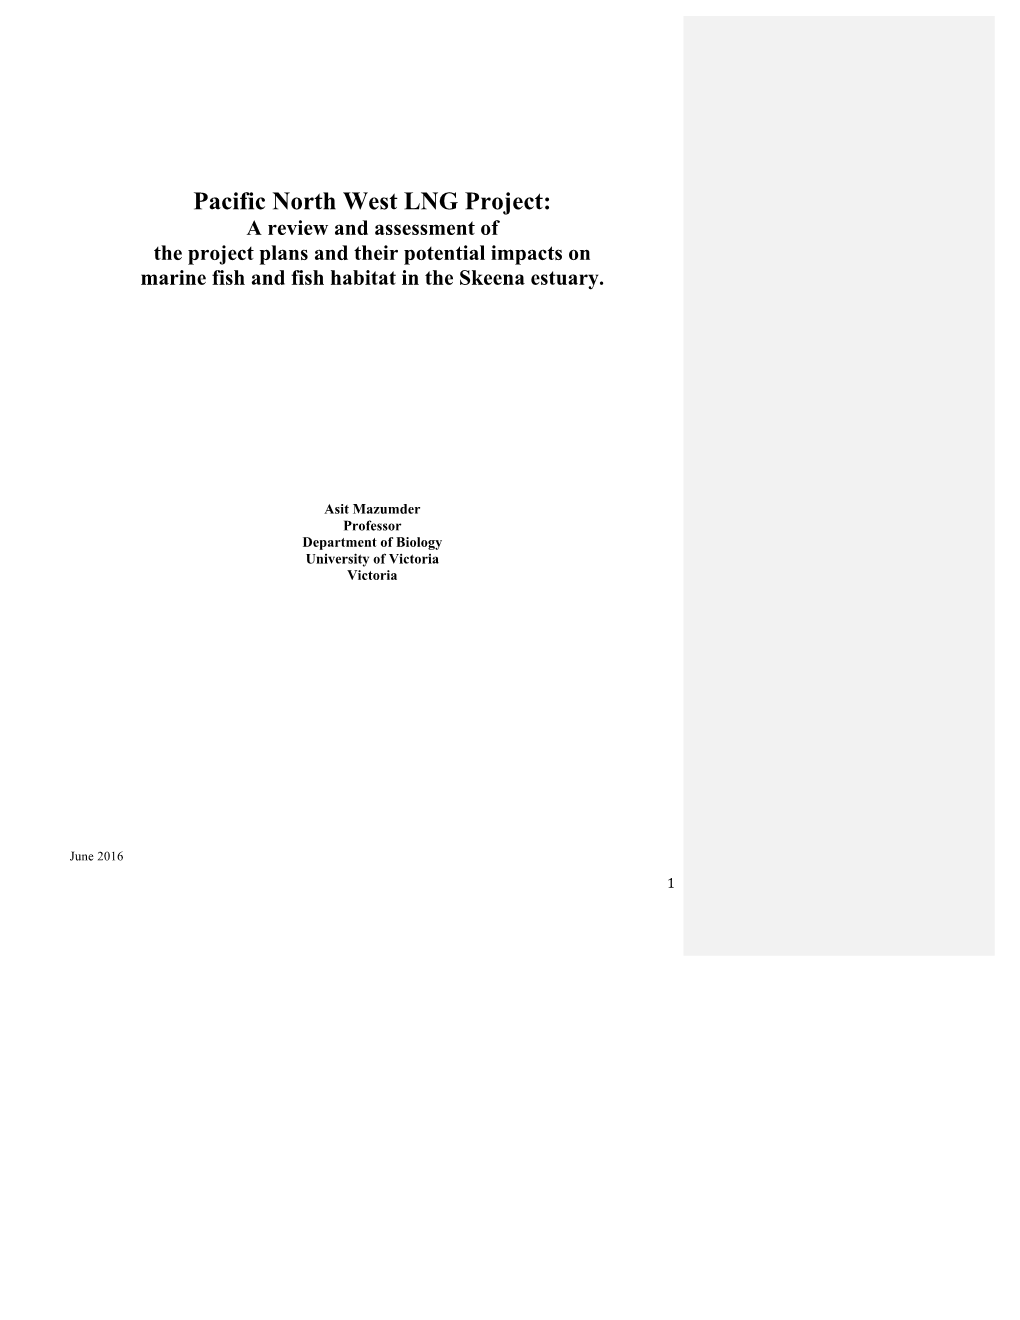 Pacific North West LNG Project: a Review and Assessment of the Project Plans and Their Potential Impacts on Marine Fish and Fish Habitat in the Skeena Estuary